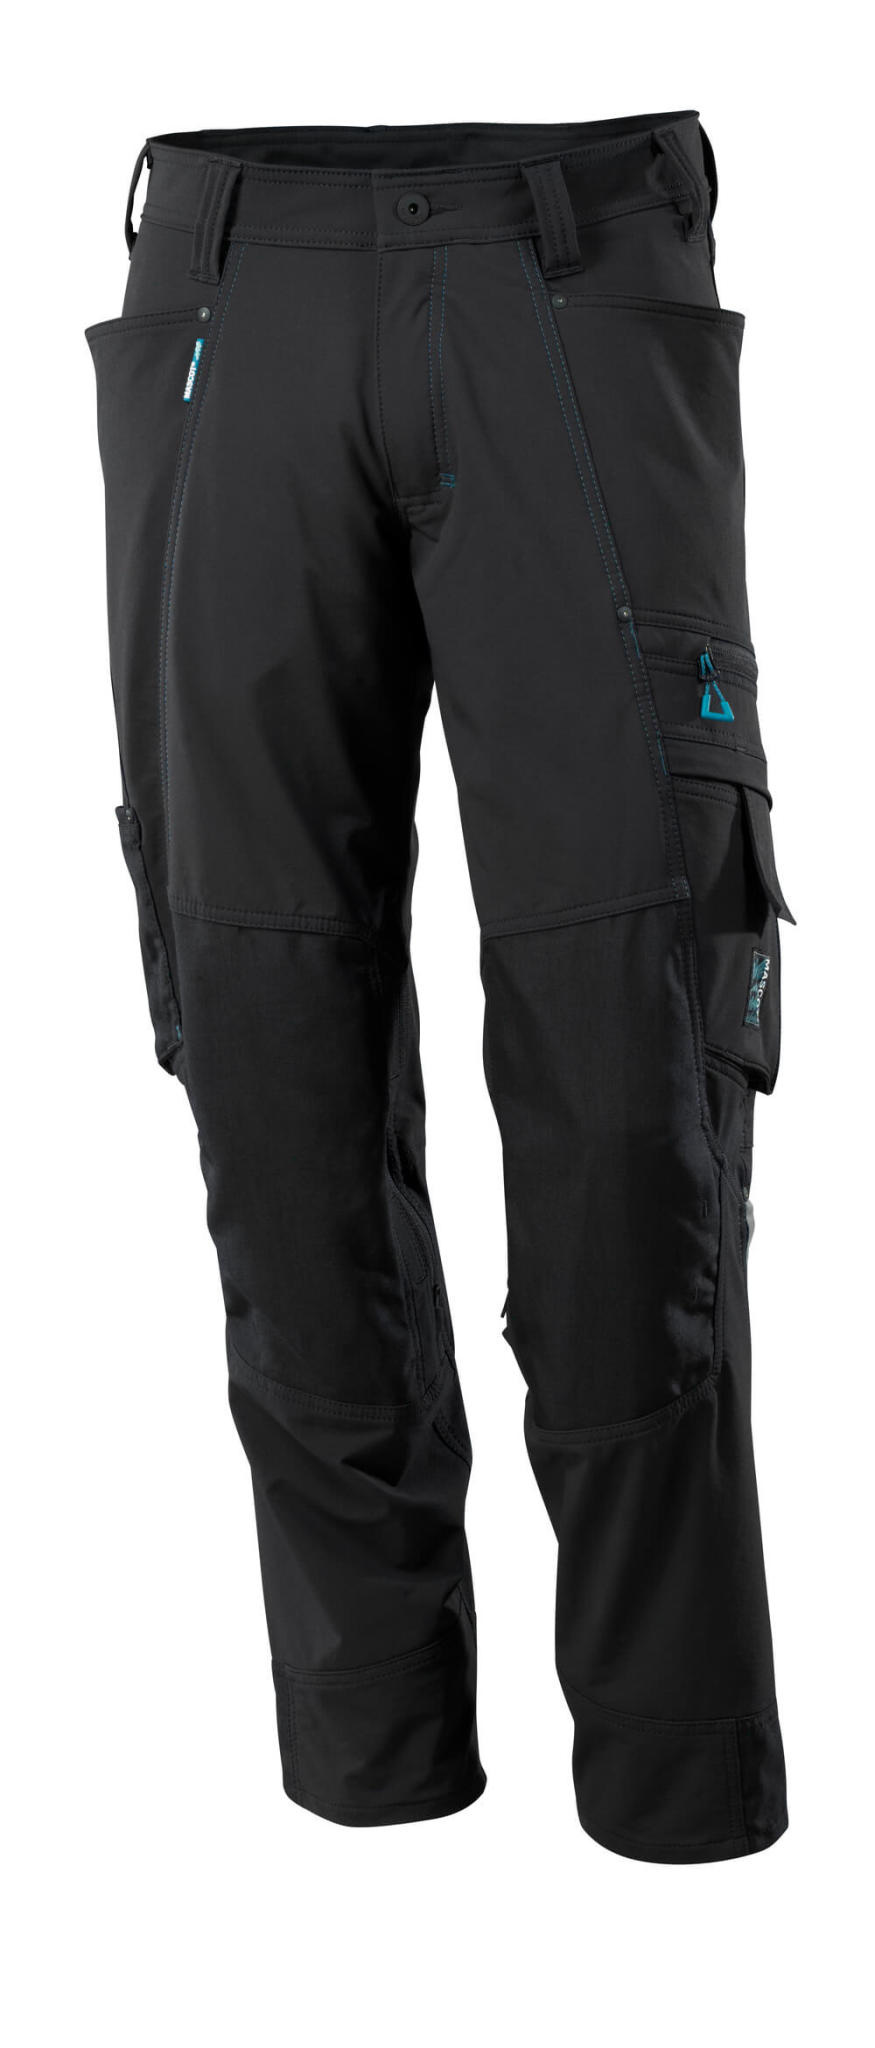 Mascot Advanced Trousers with Holster Pockets - Workwear.co.uk